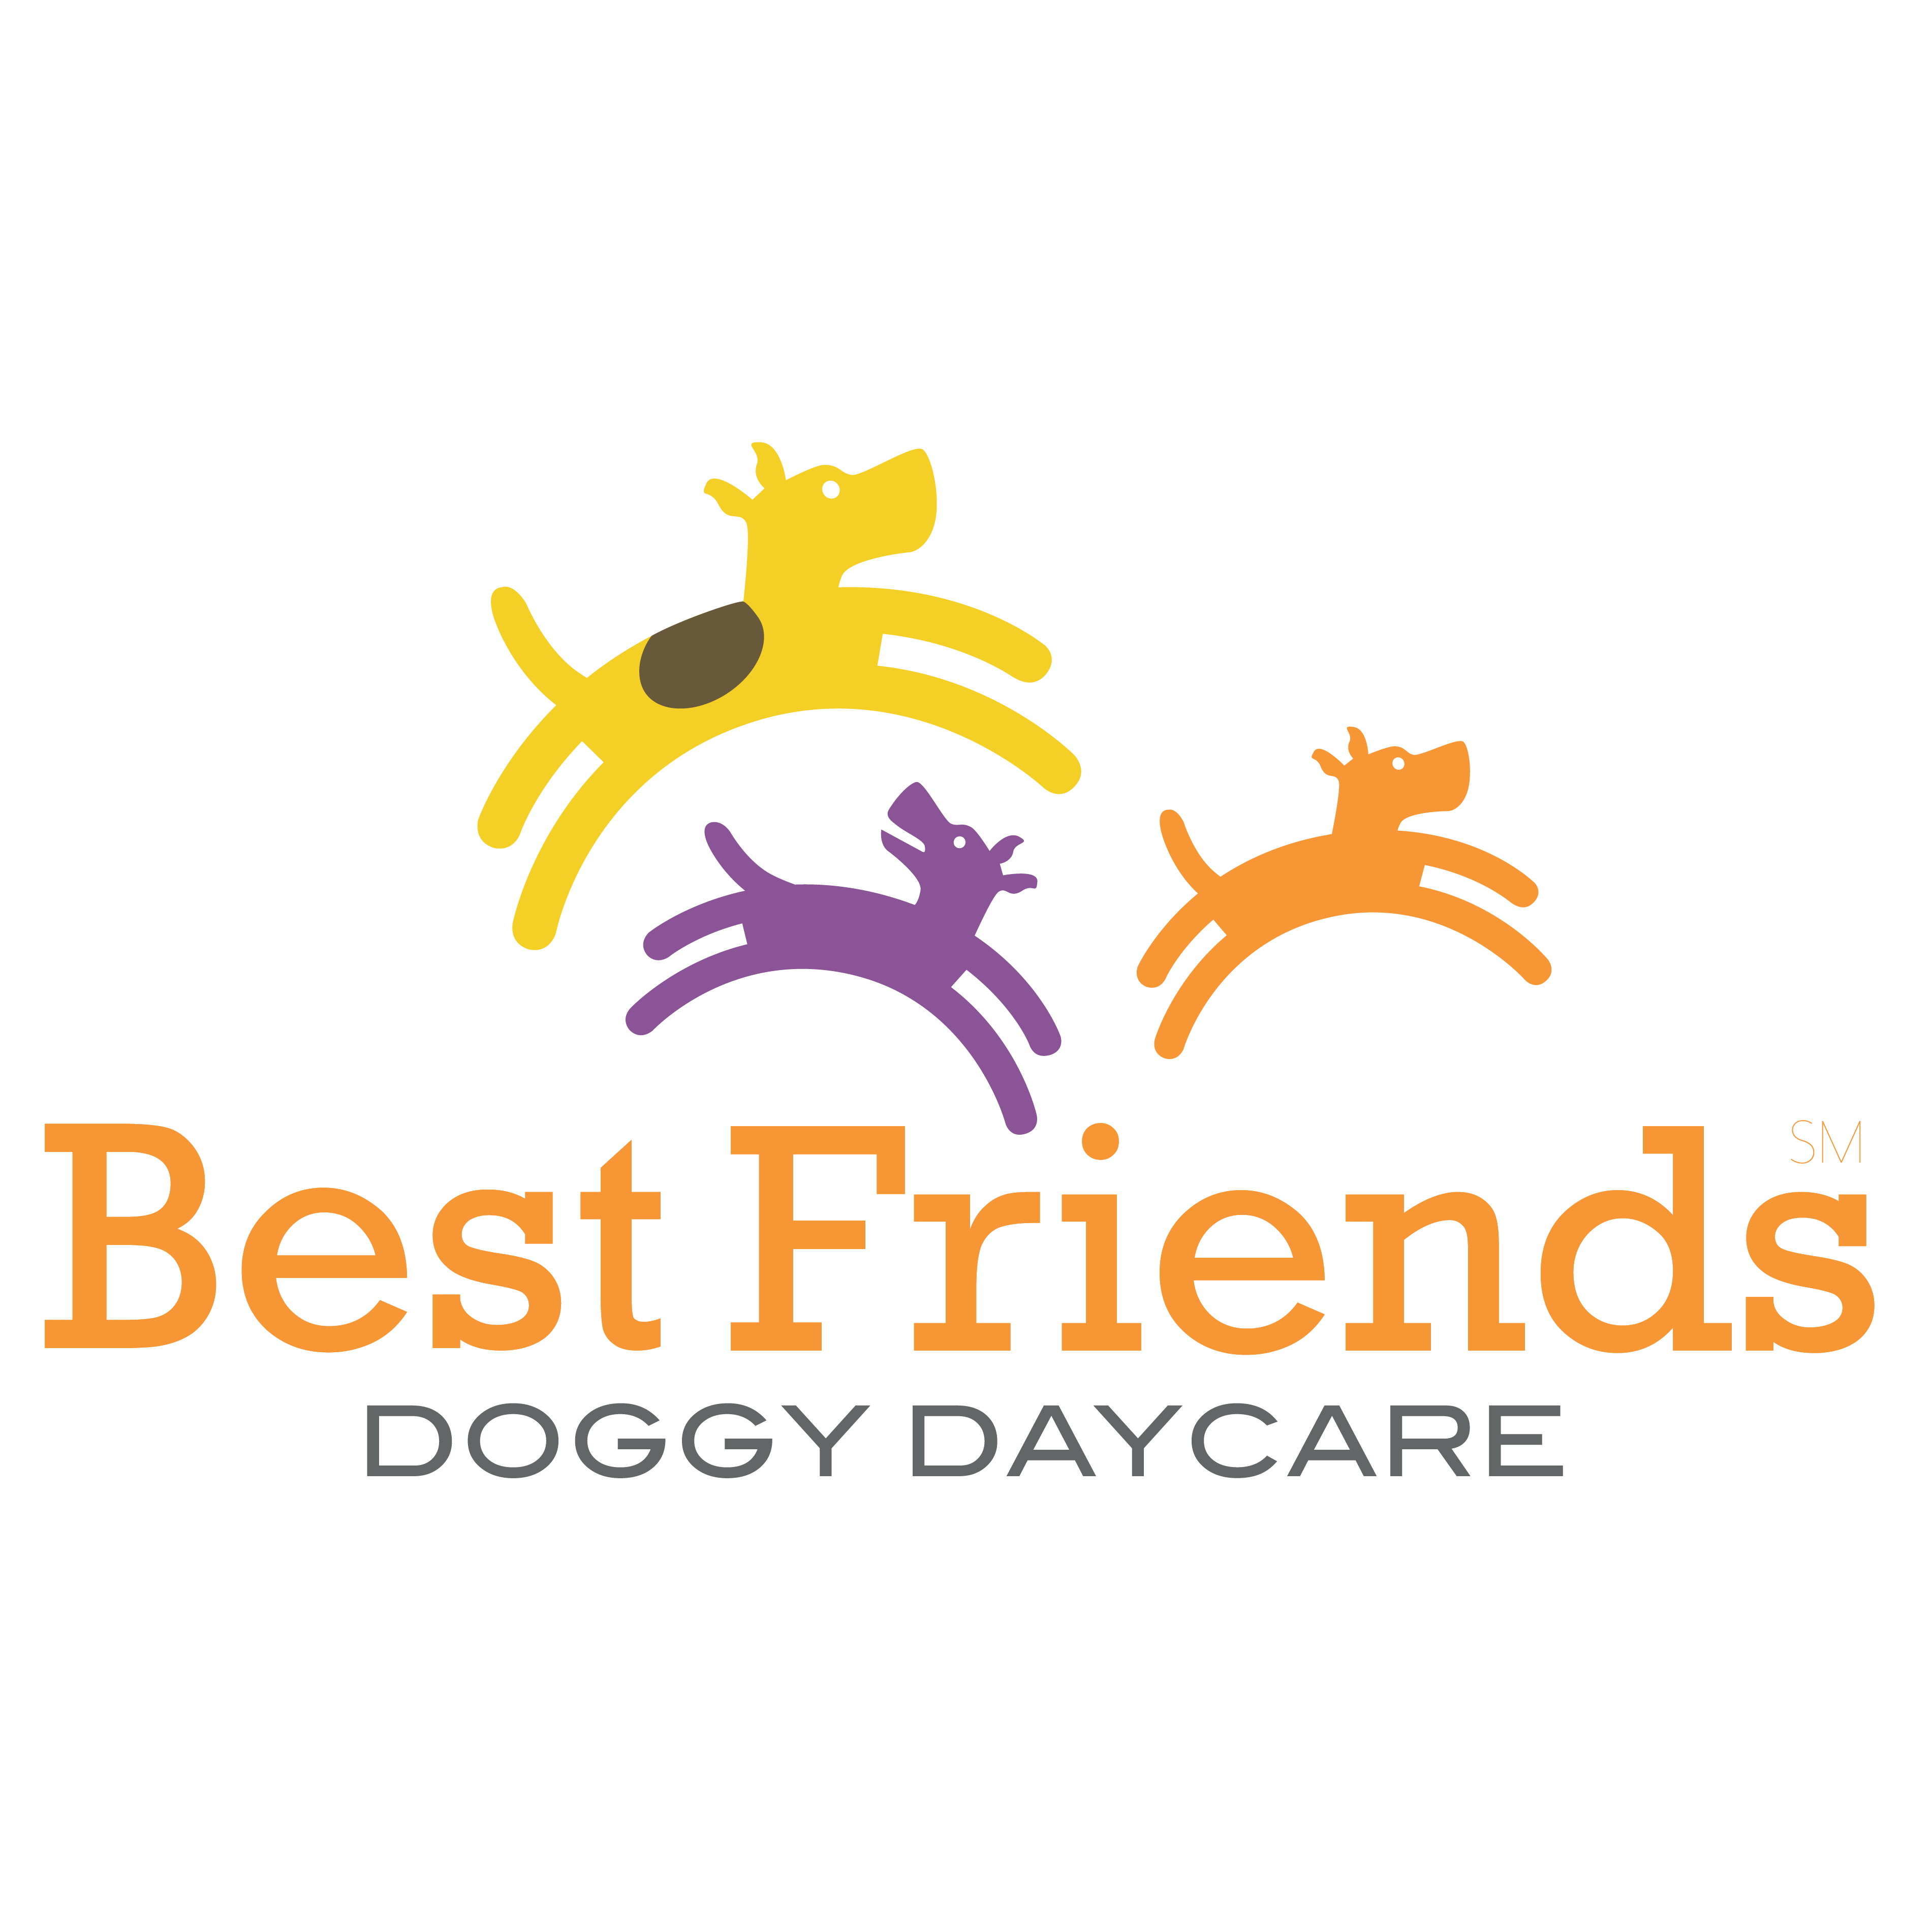 Best Friends Doggy Daycare